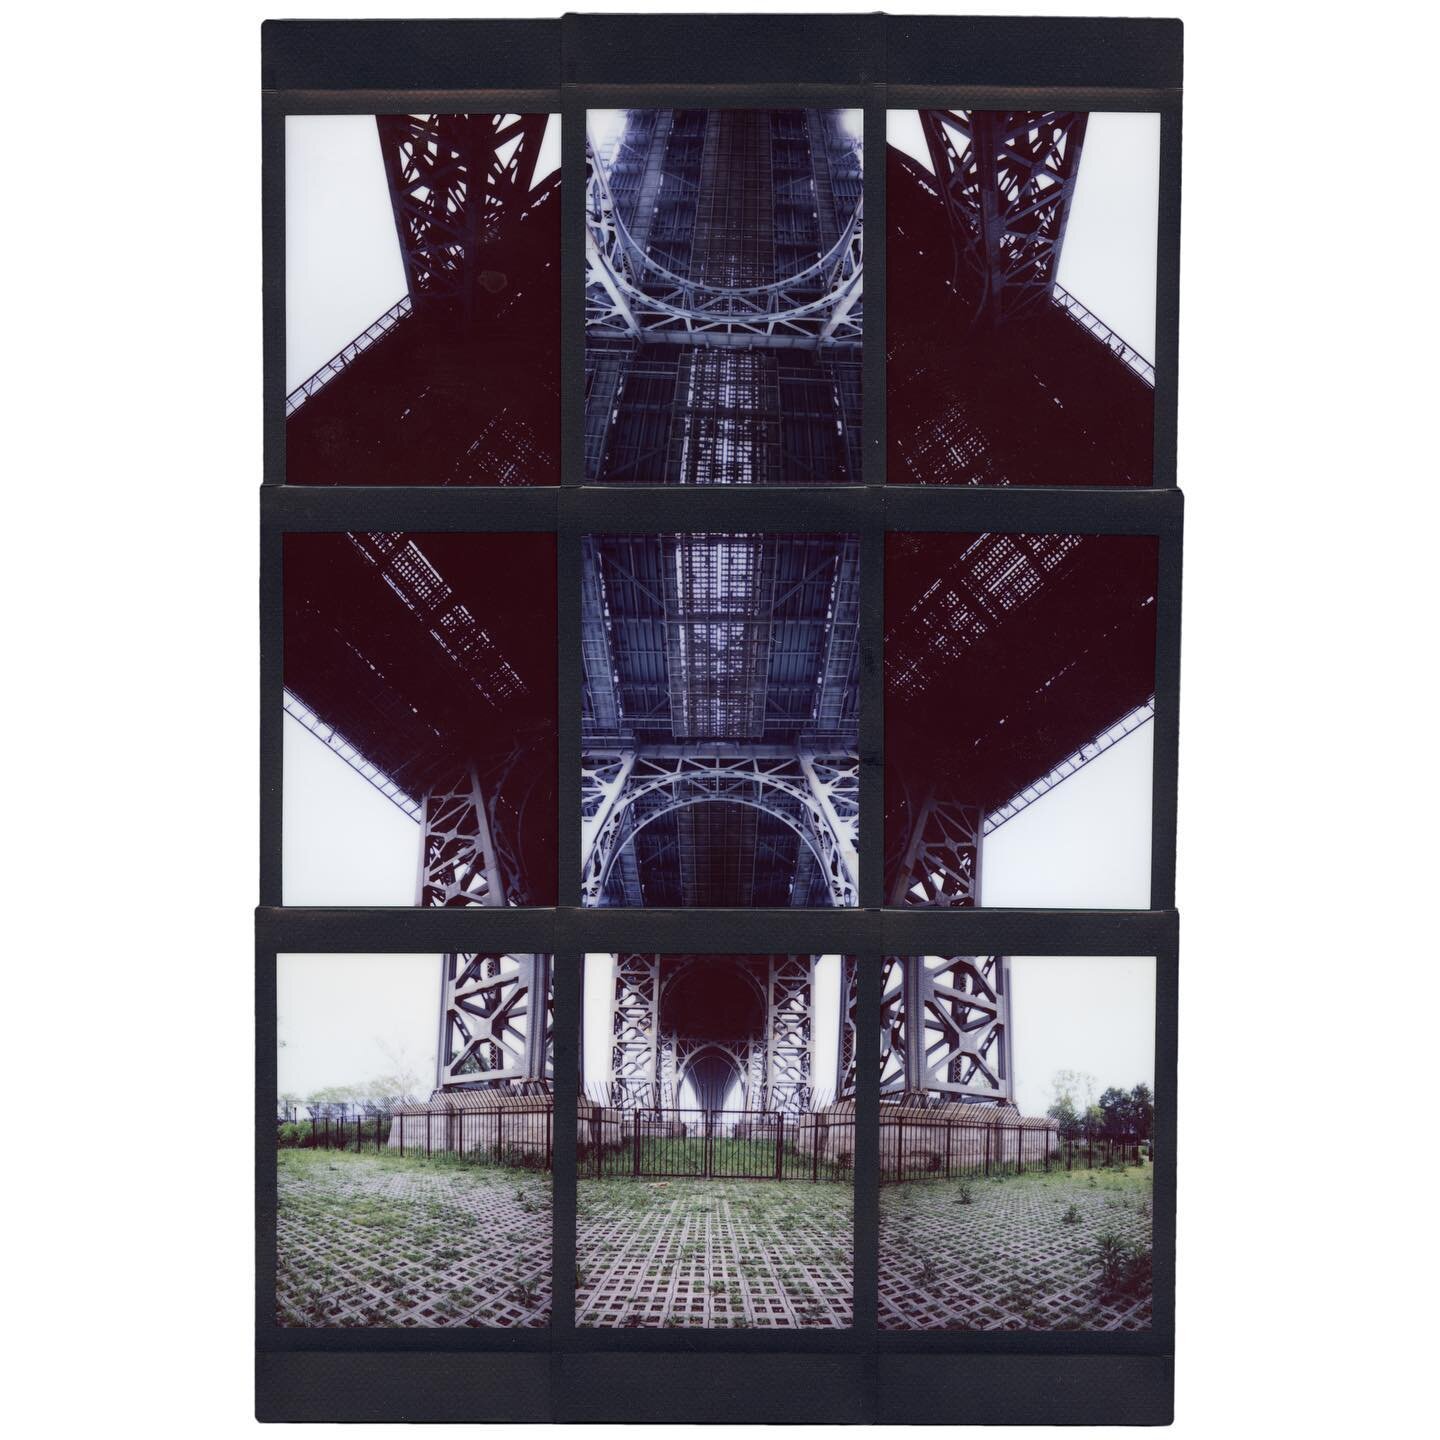 Instant film collage of the Williamsburg Bridge
&bull;
This was shot handheld with an instax mini 90. The exposure isn&rsquo;t perfect but I like the lines. 

#williamsburg #williamsburgbridge #instantfilm #instax #instaxmini90 #collage #nyc #newyork